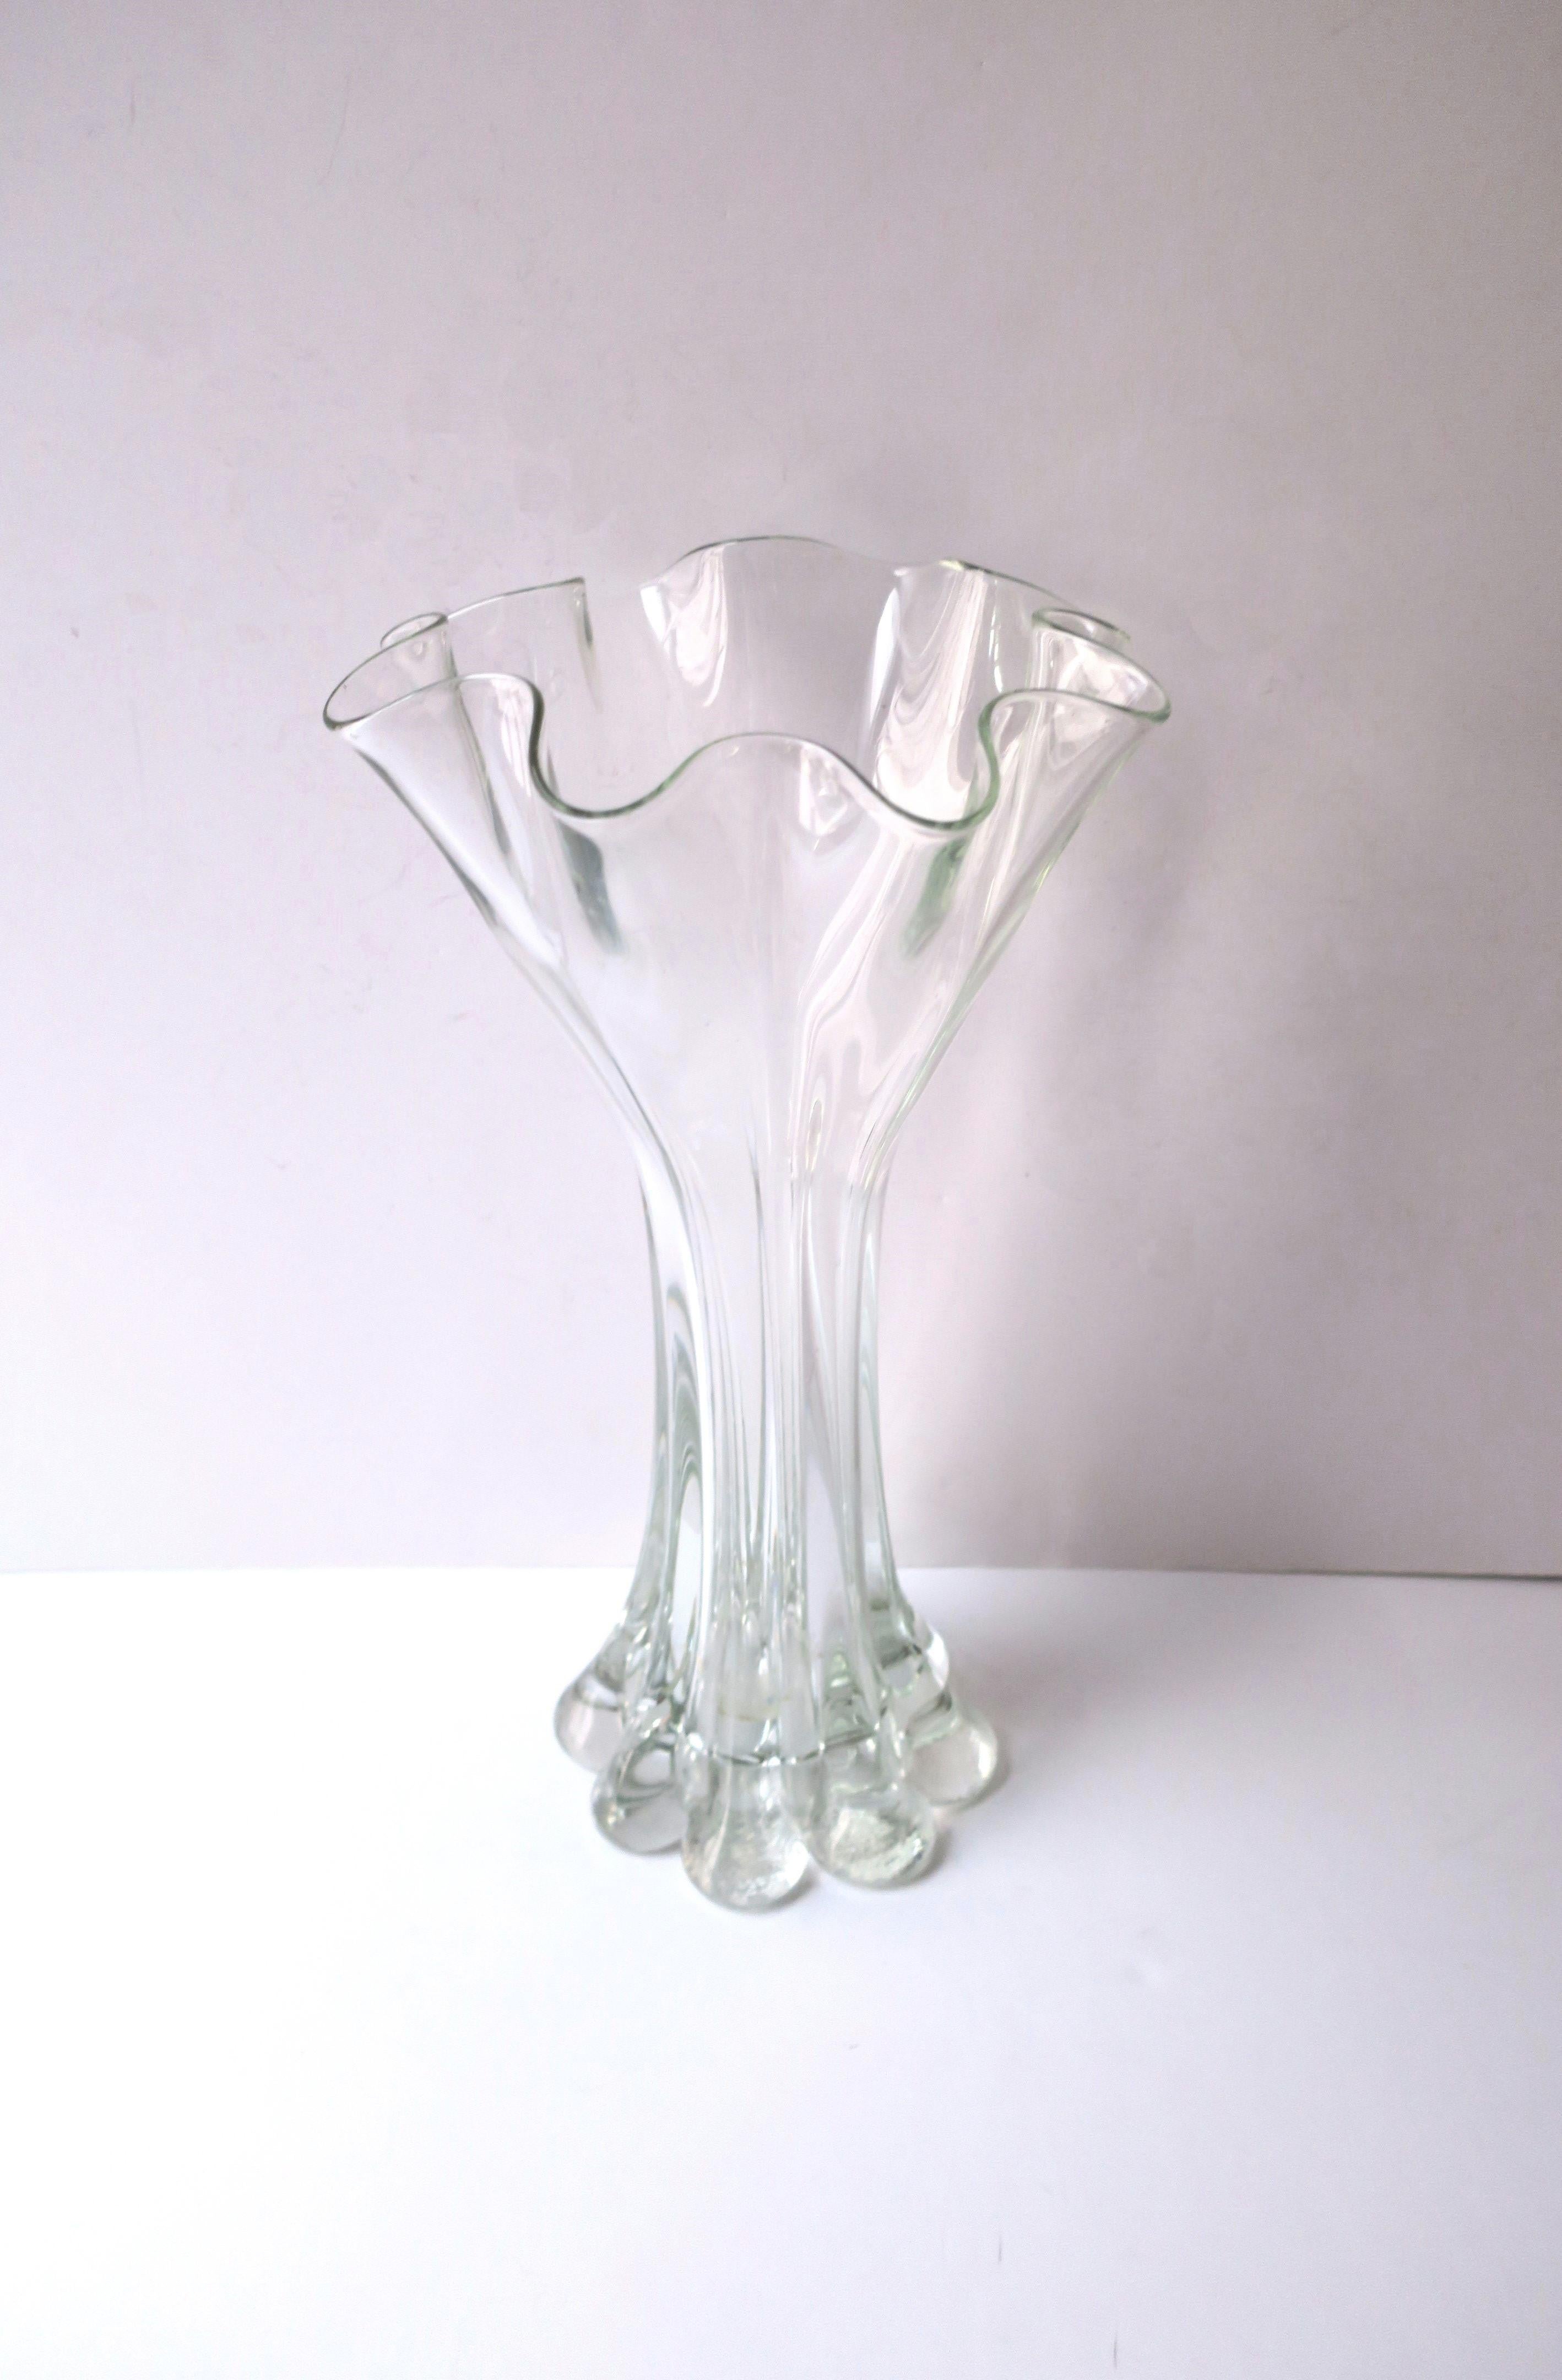 A beautiful, substantial, and relatively tall clear transparent hand-blown art glass vase, Organic Modern, circa mid to late-20th century, Scandinavia. A beautiful art glass vase with ruffles edge and a modern trunk-like neck/base. Smooth round